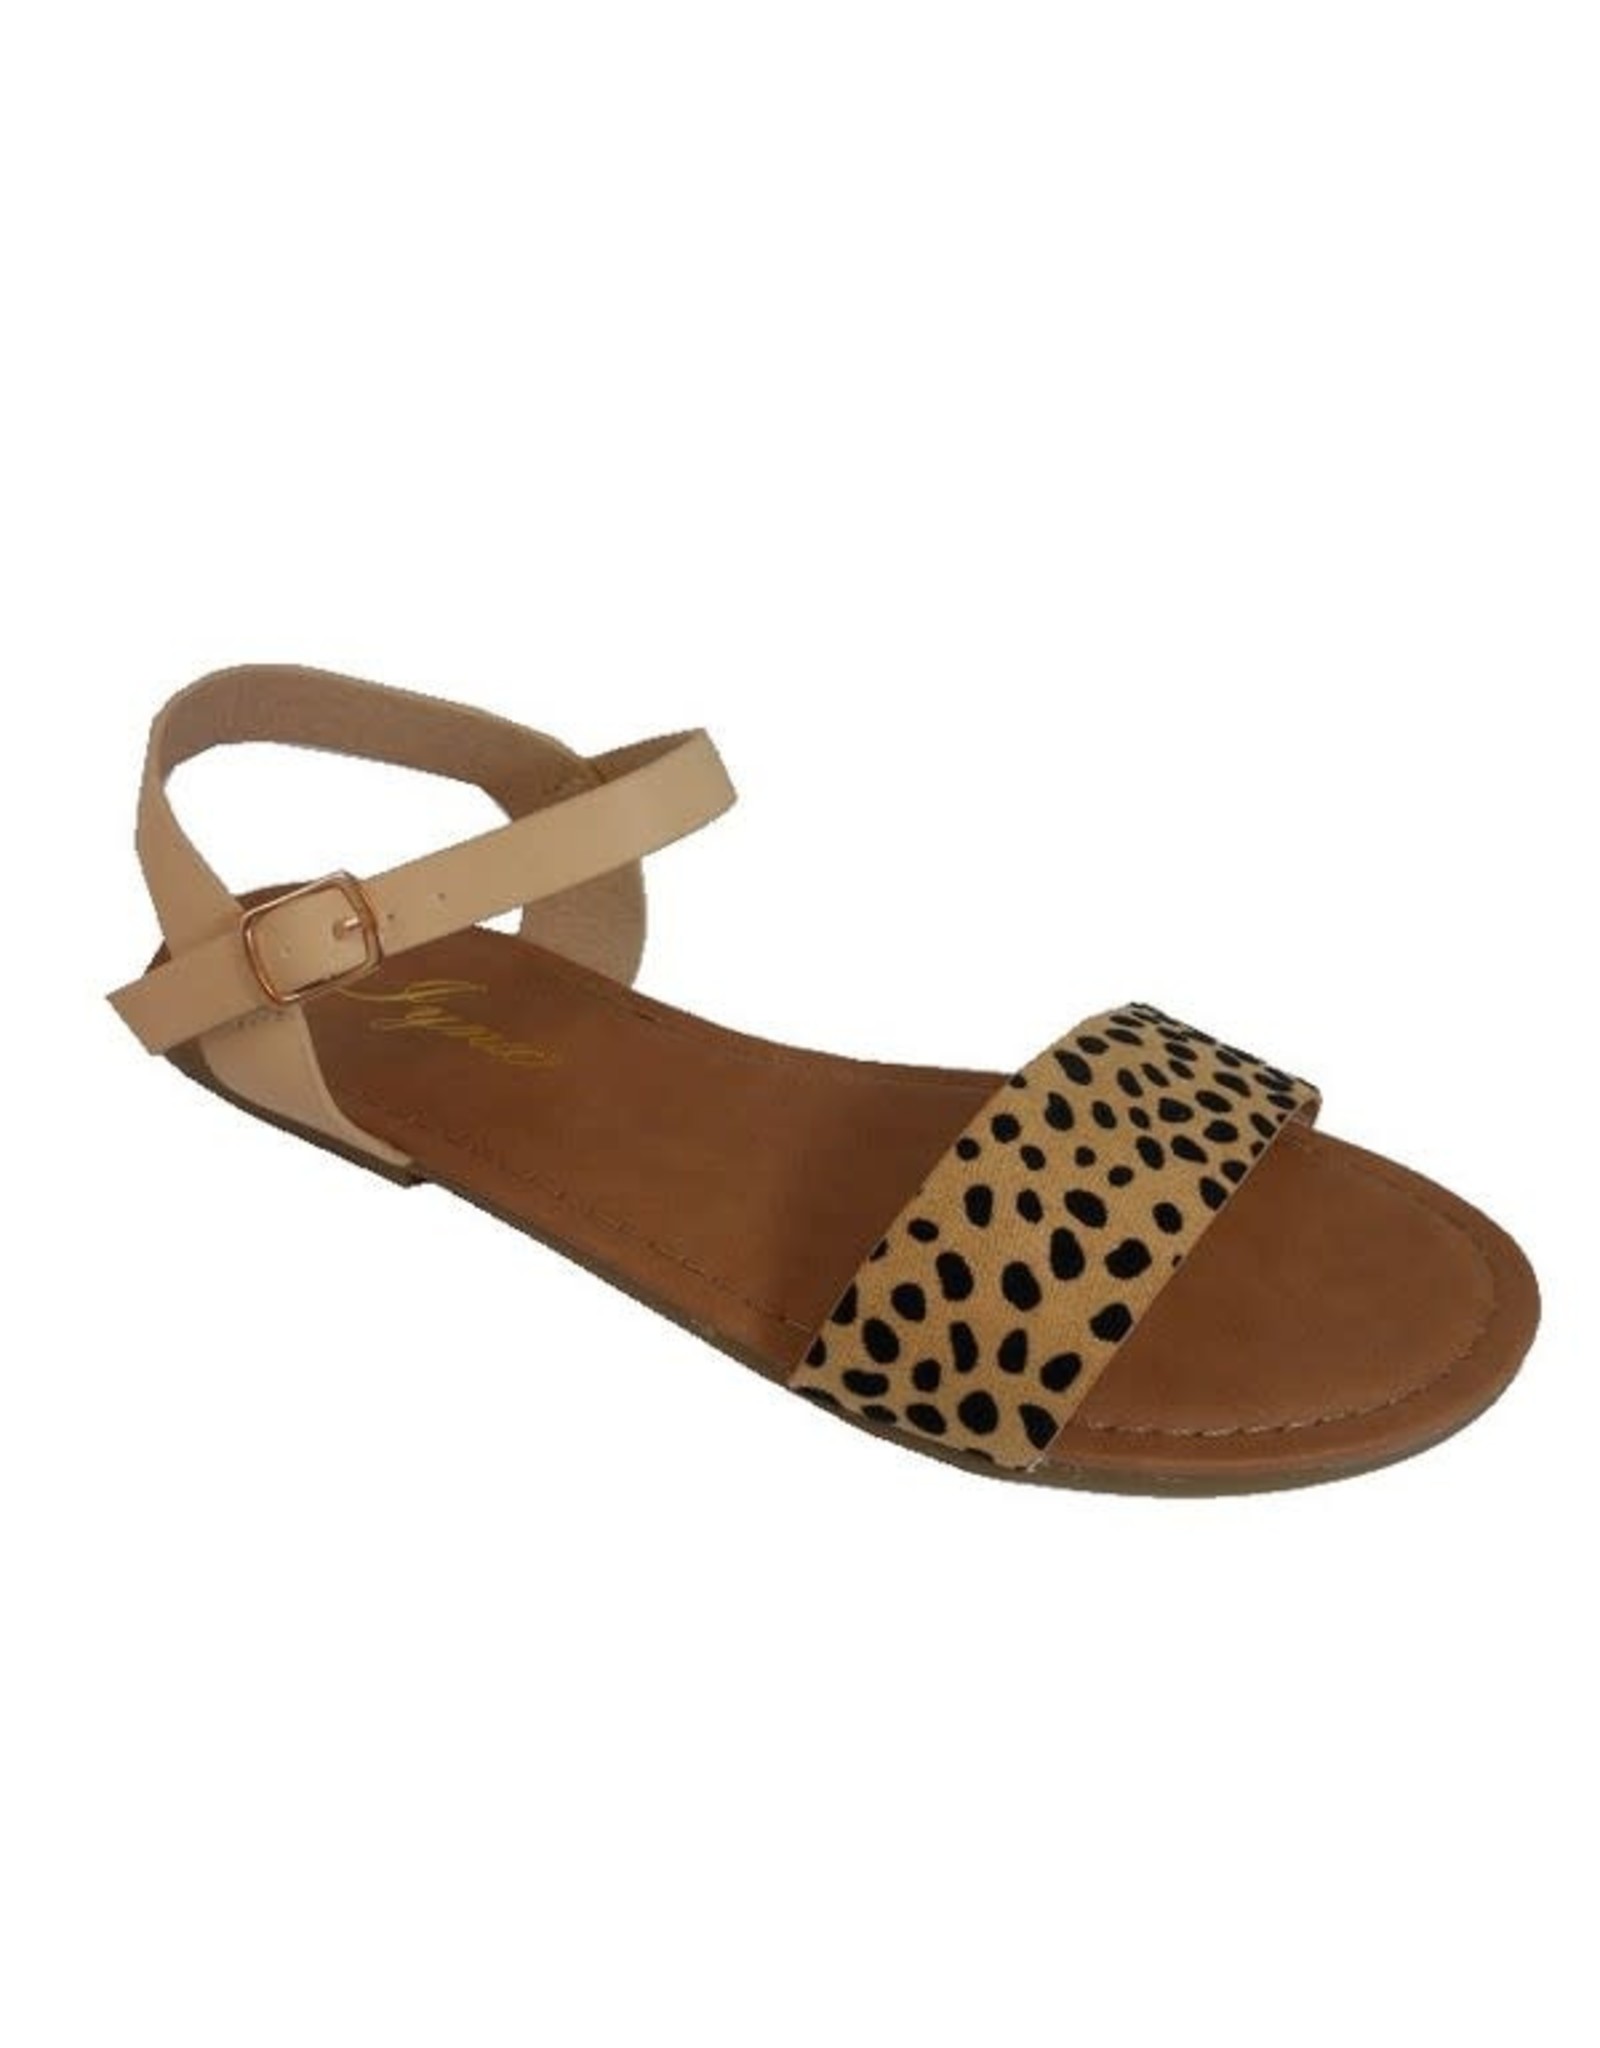 ANNA Leopard Sandals - The Ritzy Gypsy